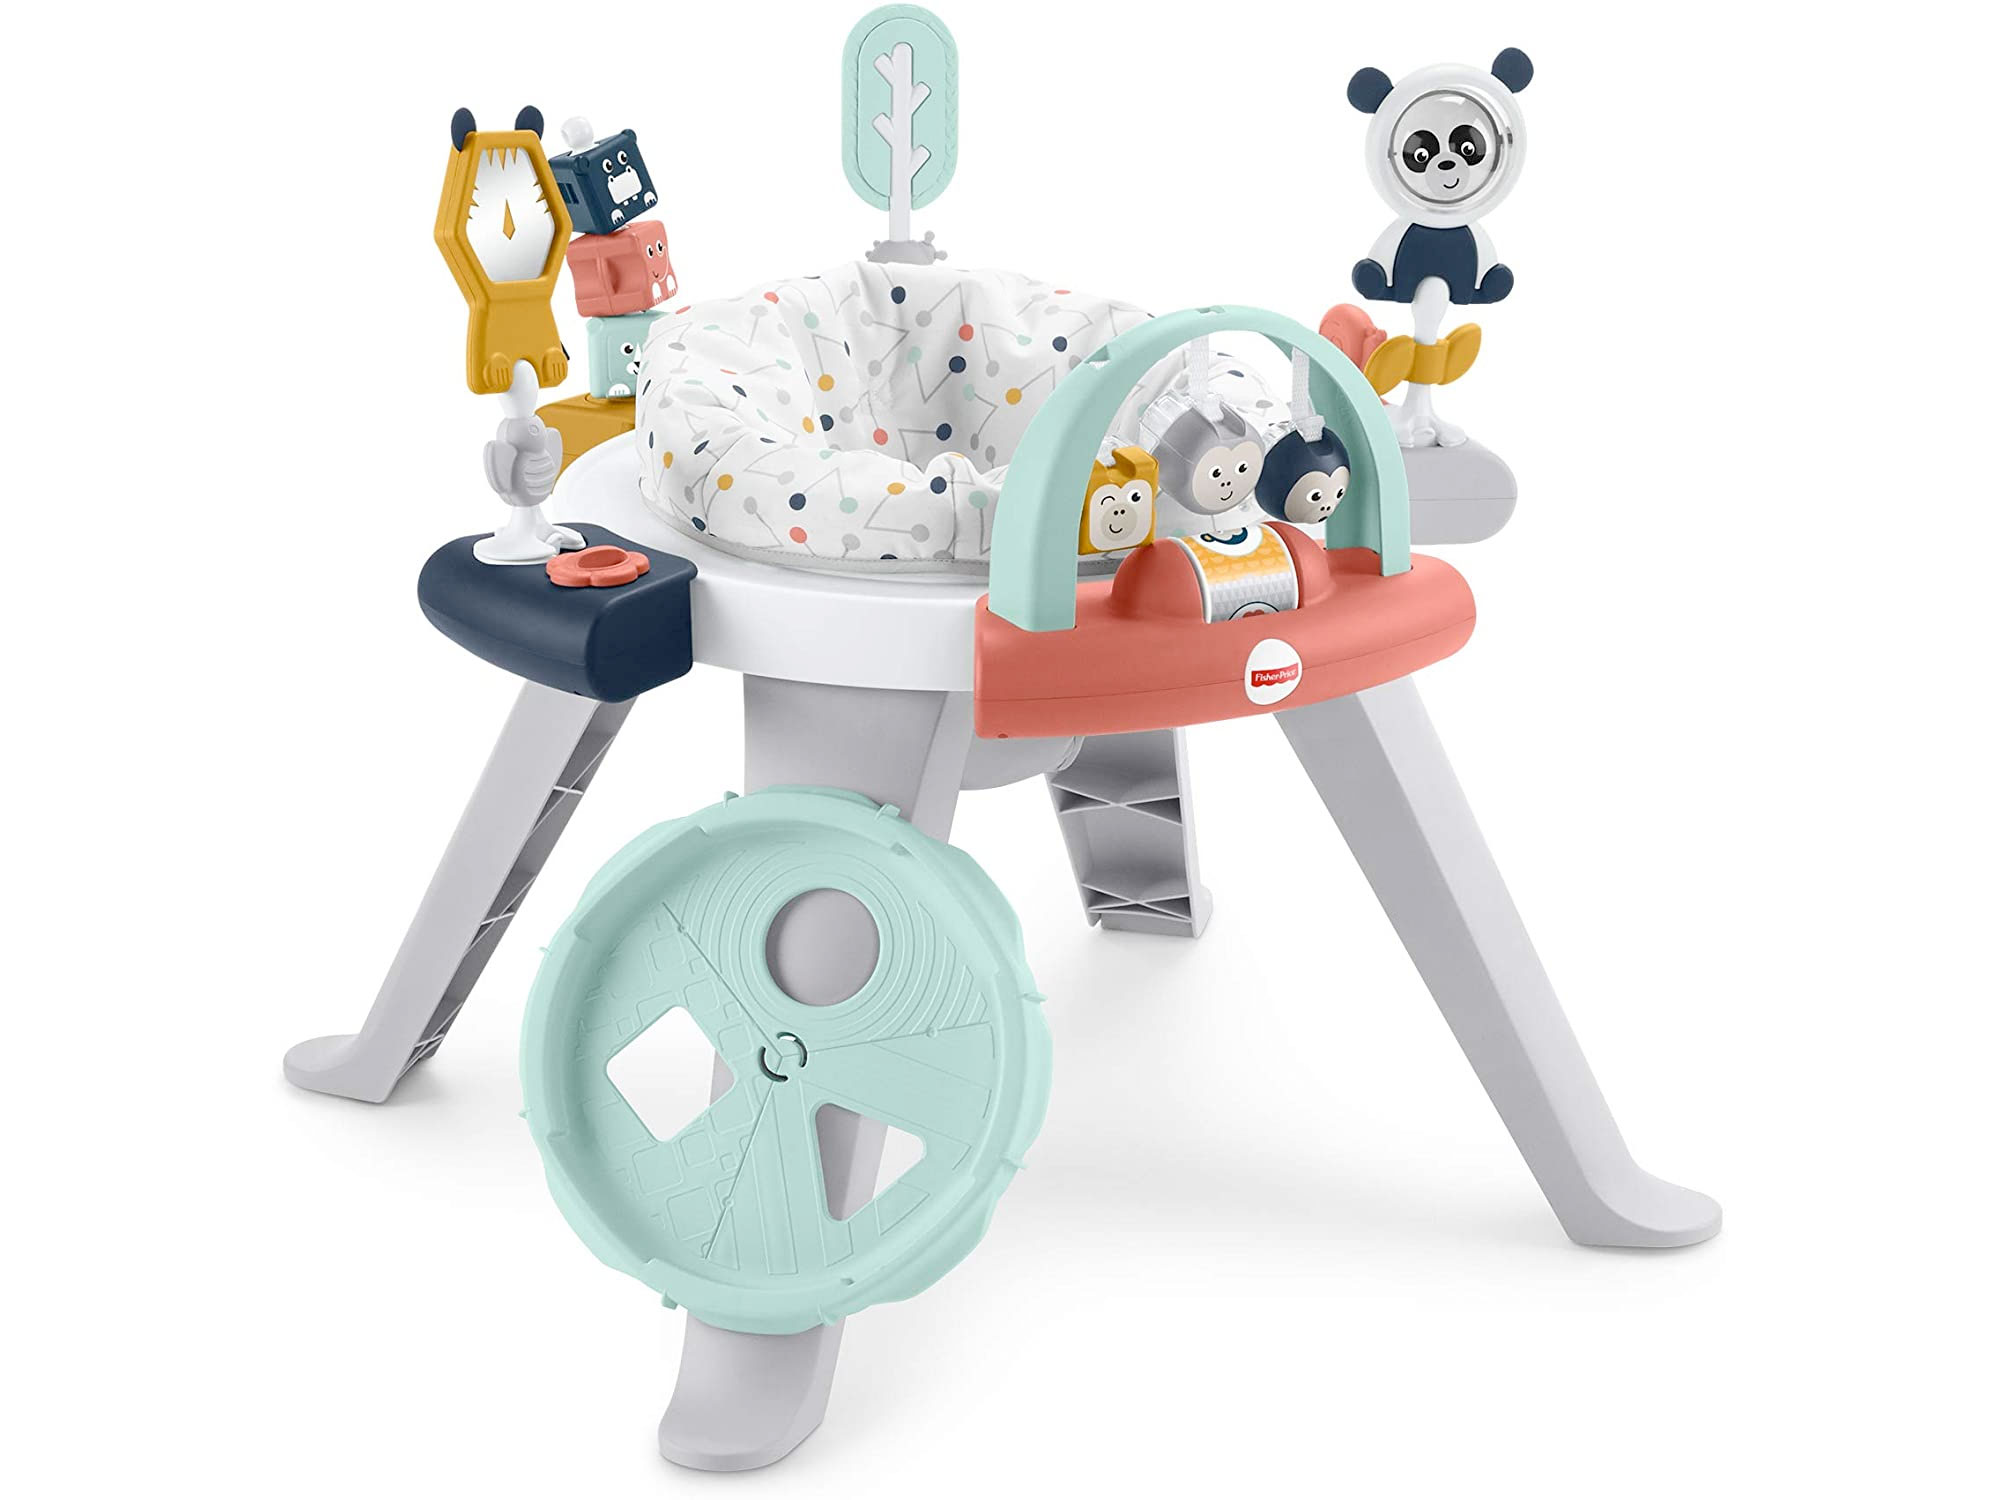 Amazon：Fisher-Price 3-In-1 Spin & Sort Activity Center只賣$56.17